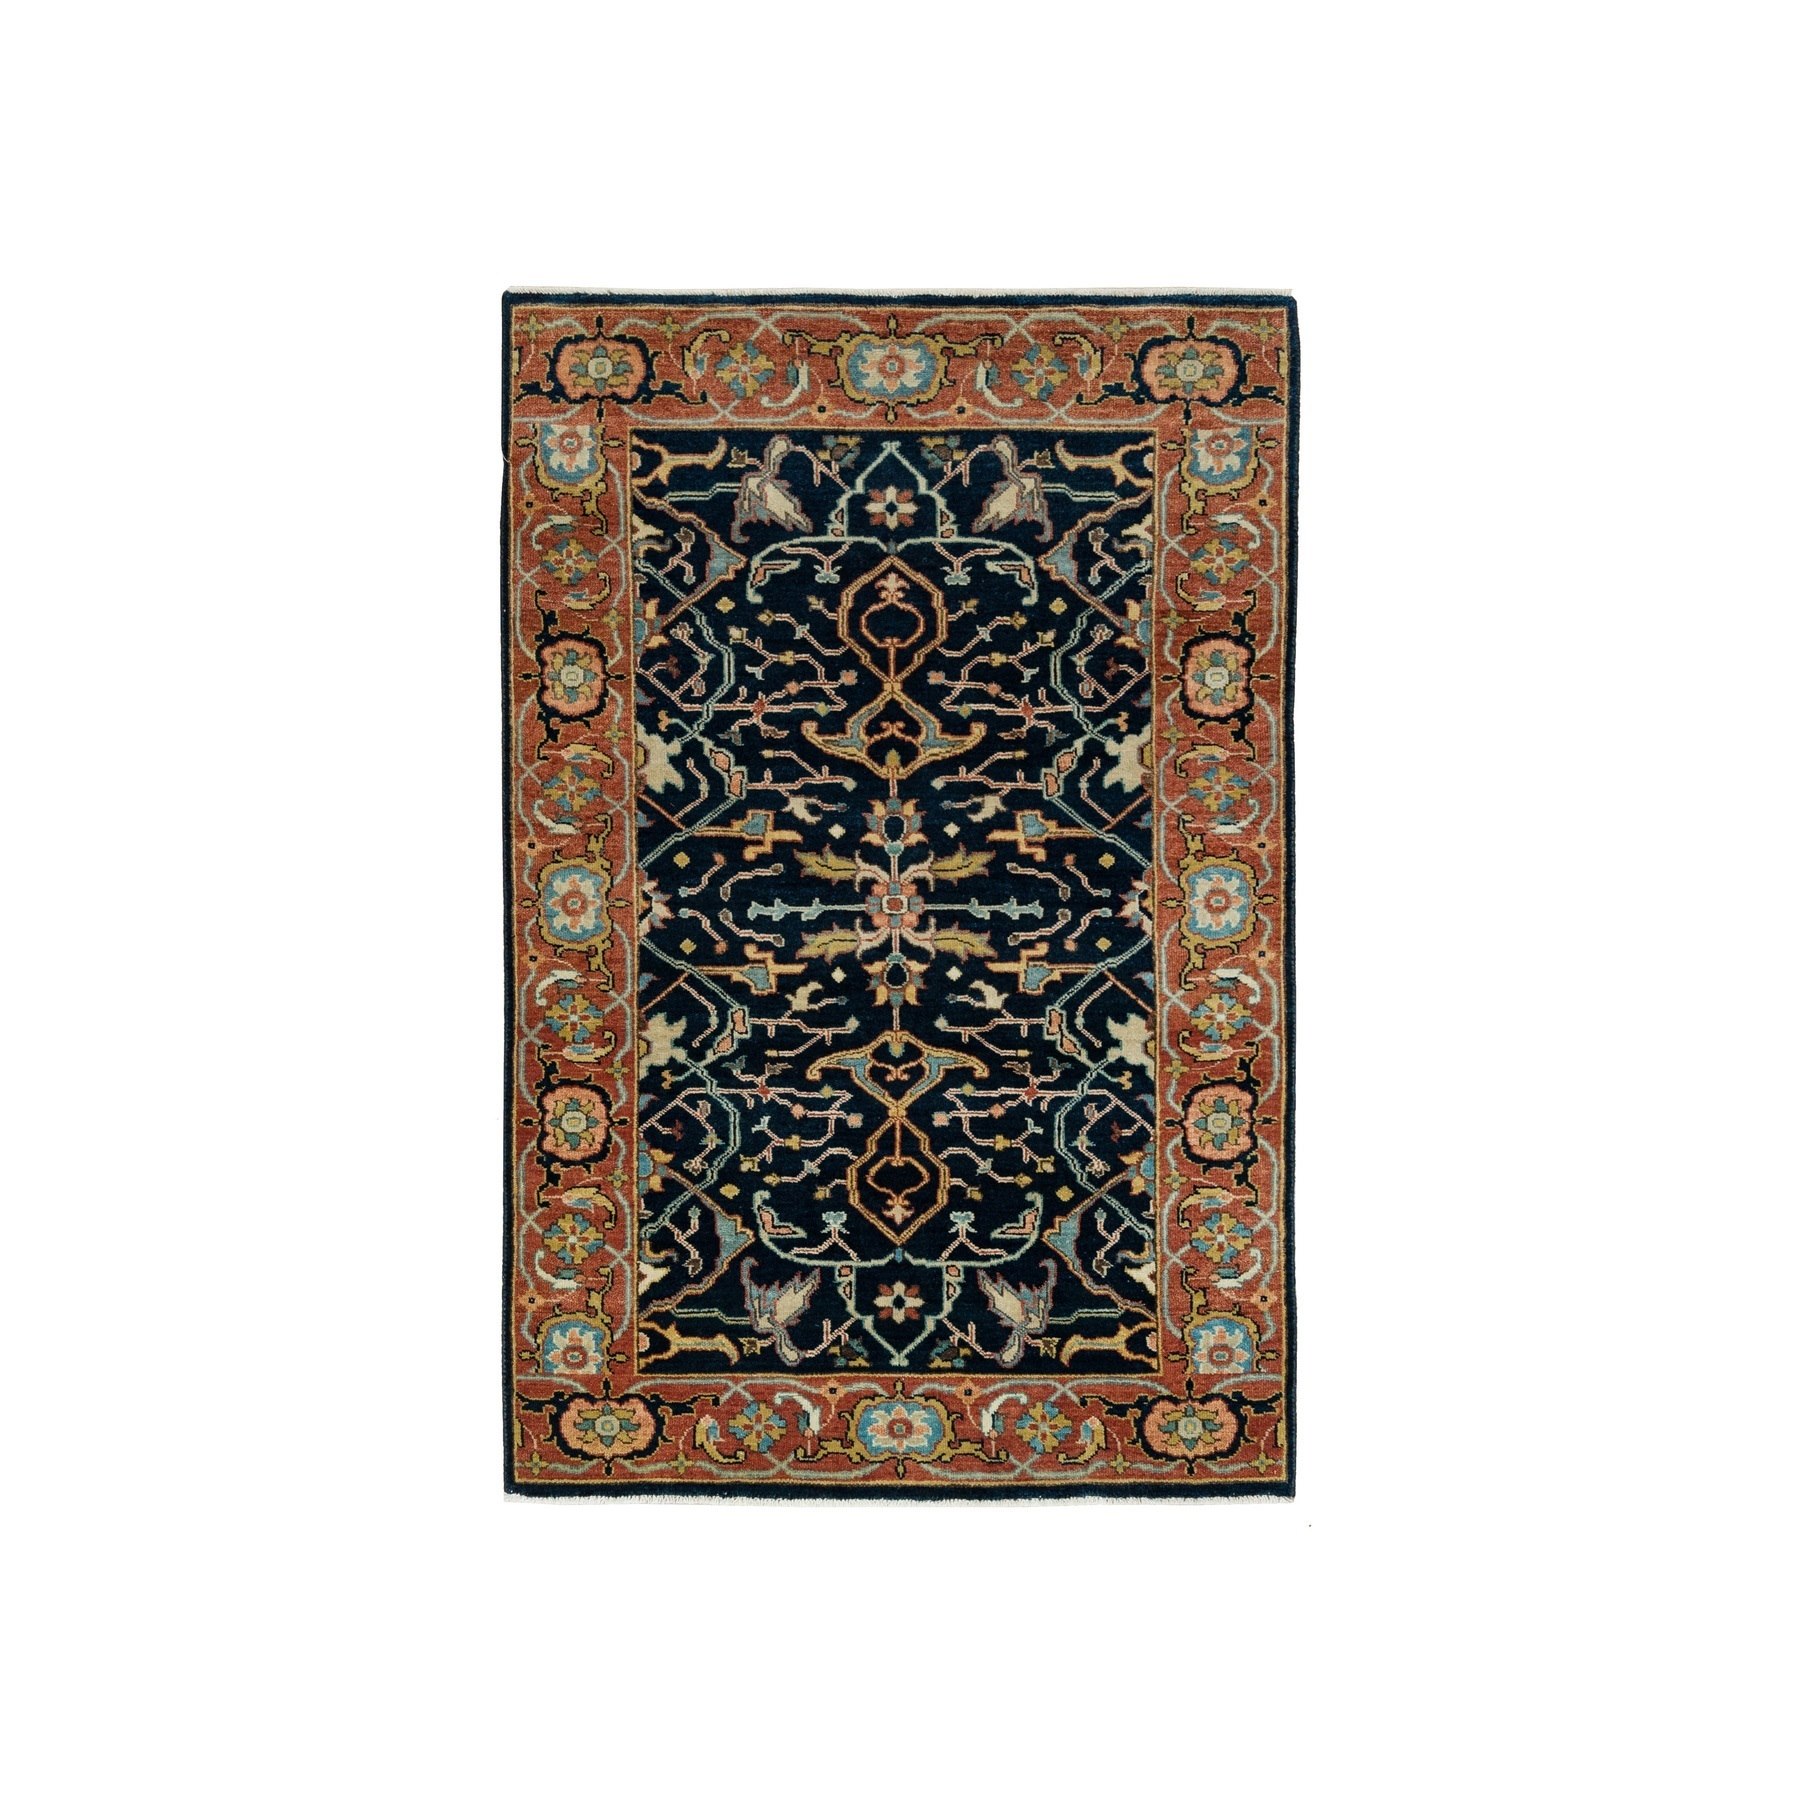 3'1"x5'2" Millennium Blue, Hand Woven Antiqued Fine Heriz Re-Creation Densely Woven, Natural Dyes 100% Wool, Soft Pile, Oriental Rug 